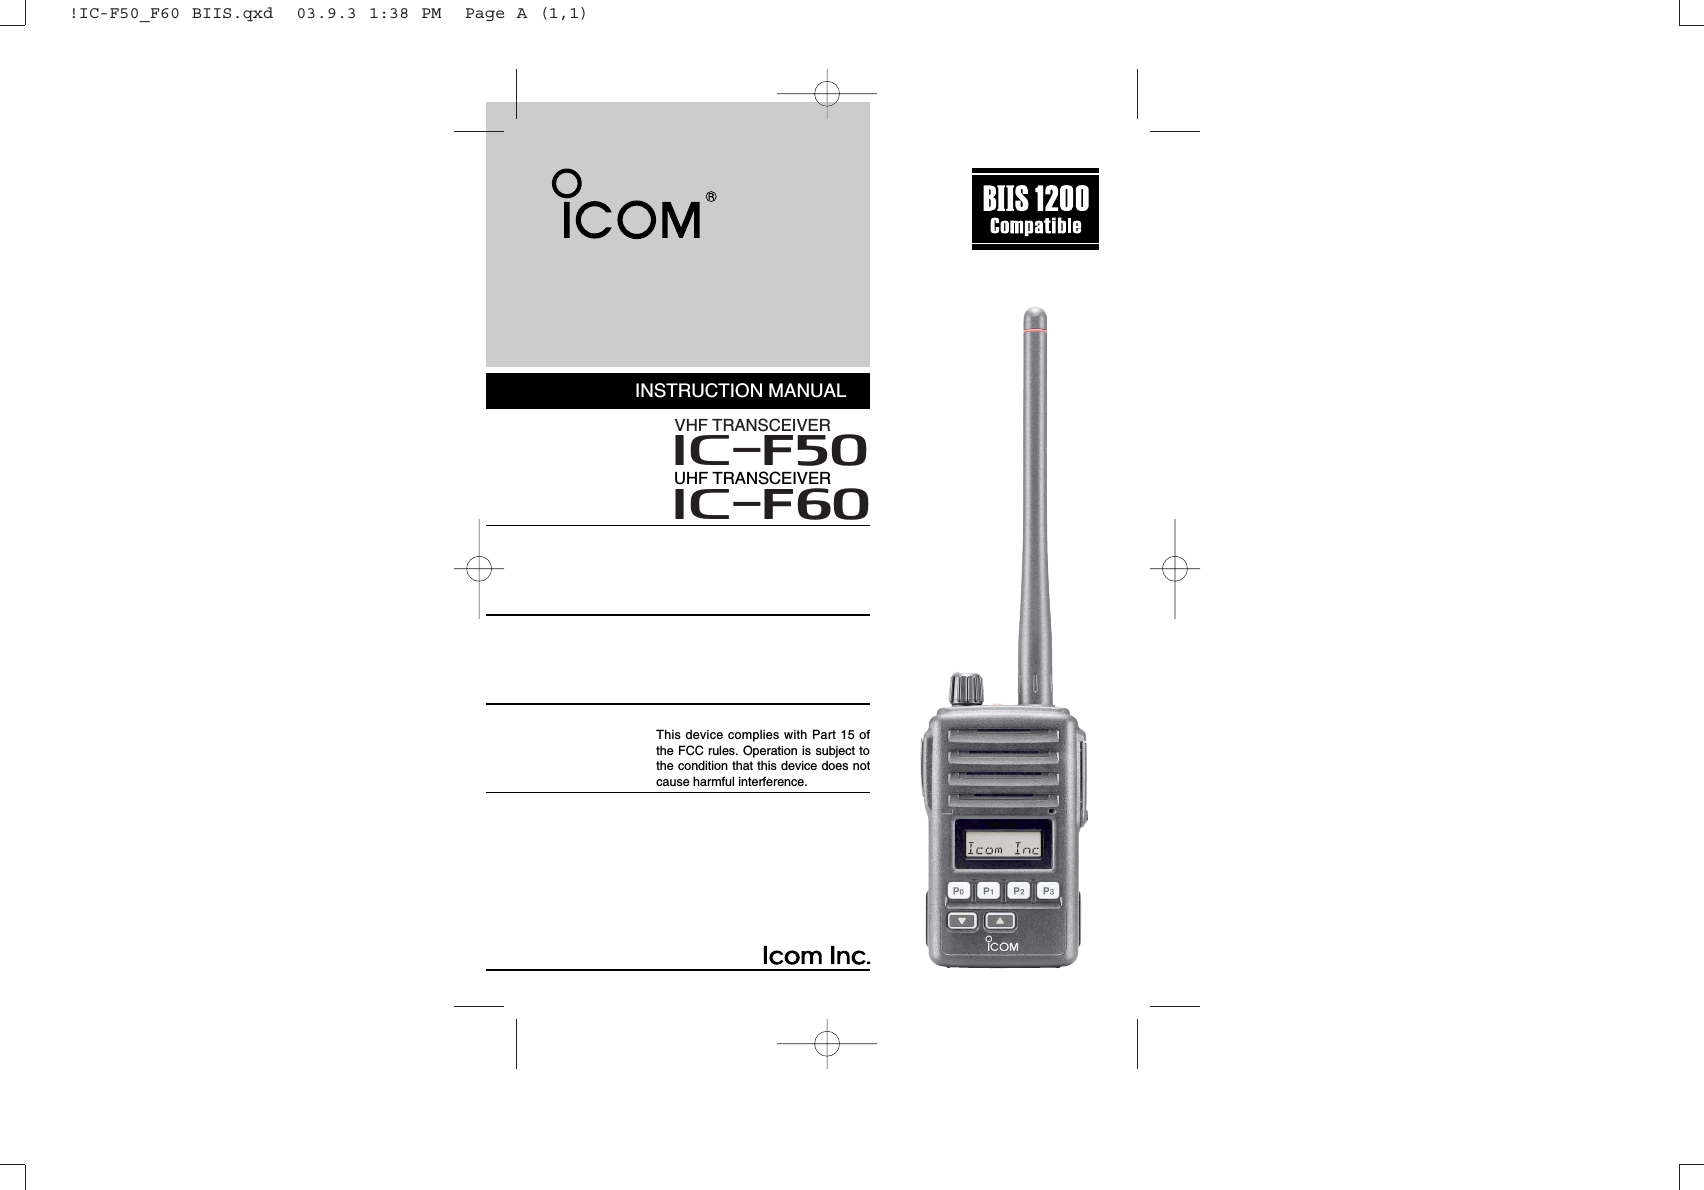 INSTRUCTION MANUALThis device complies with Part 15 ofthe FCC rules. Operation is subject tothe condition that this device does notcause harmful interference.UHF TRANSCEIVERiF60VHF TRANSCEIVERiF50!IC-F50_F60 BIIS.qxd  03.9.3 1:38 PM  Page A (1,1)